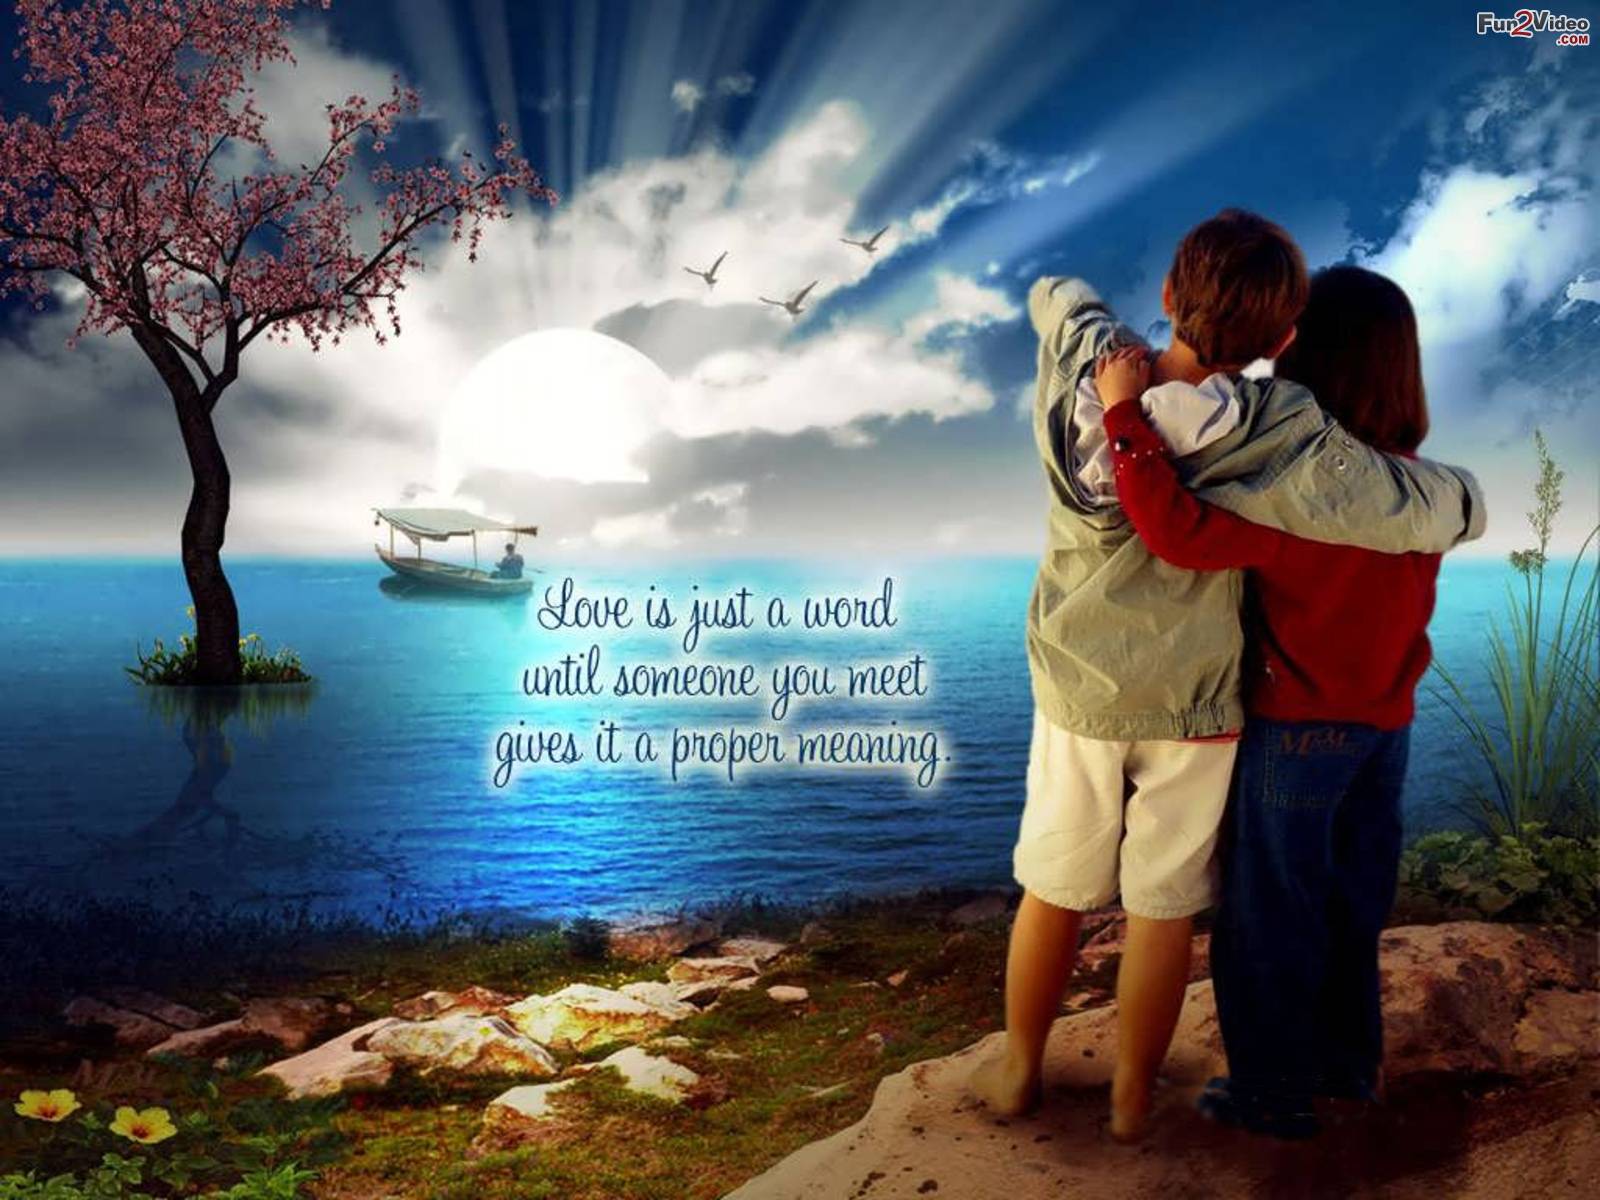 Love Wallpaper Of Romantic Love Couple With Love Quotes To Show Love